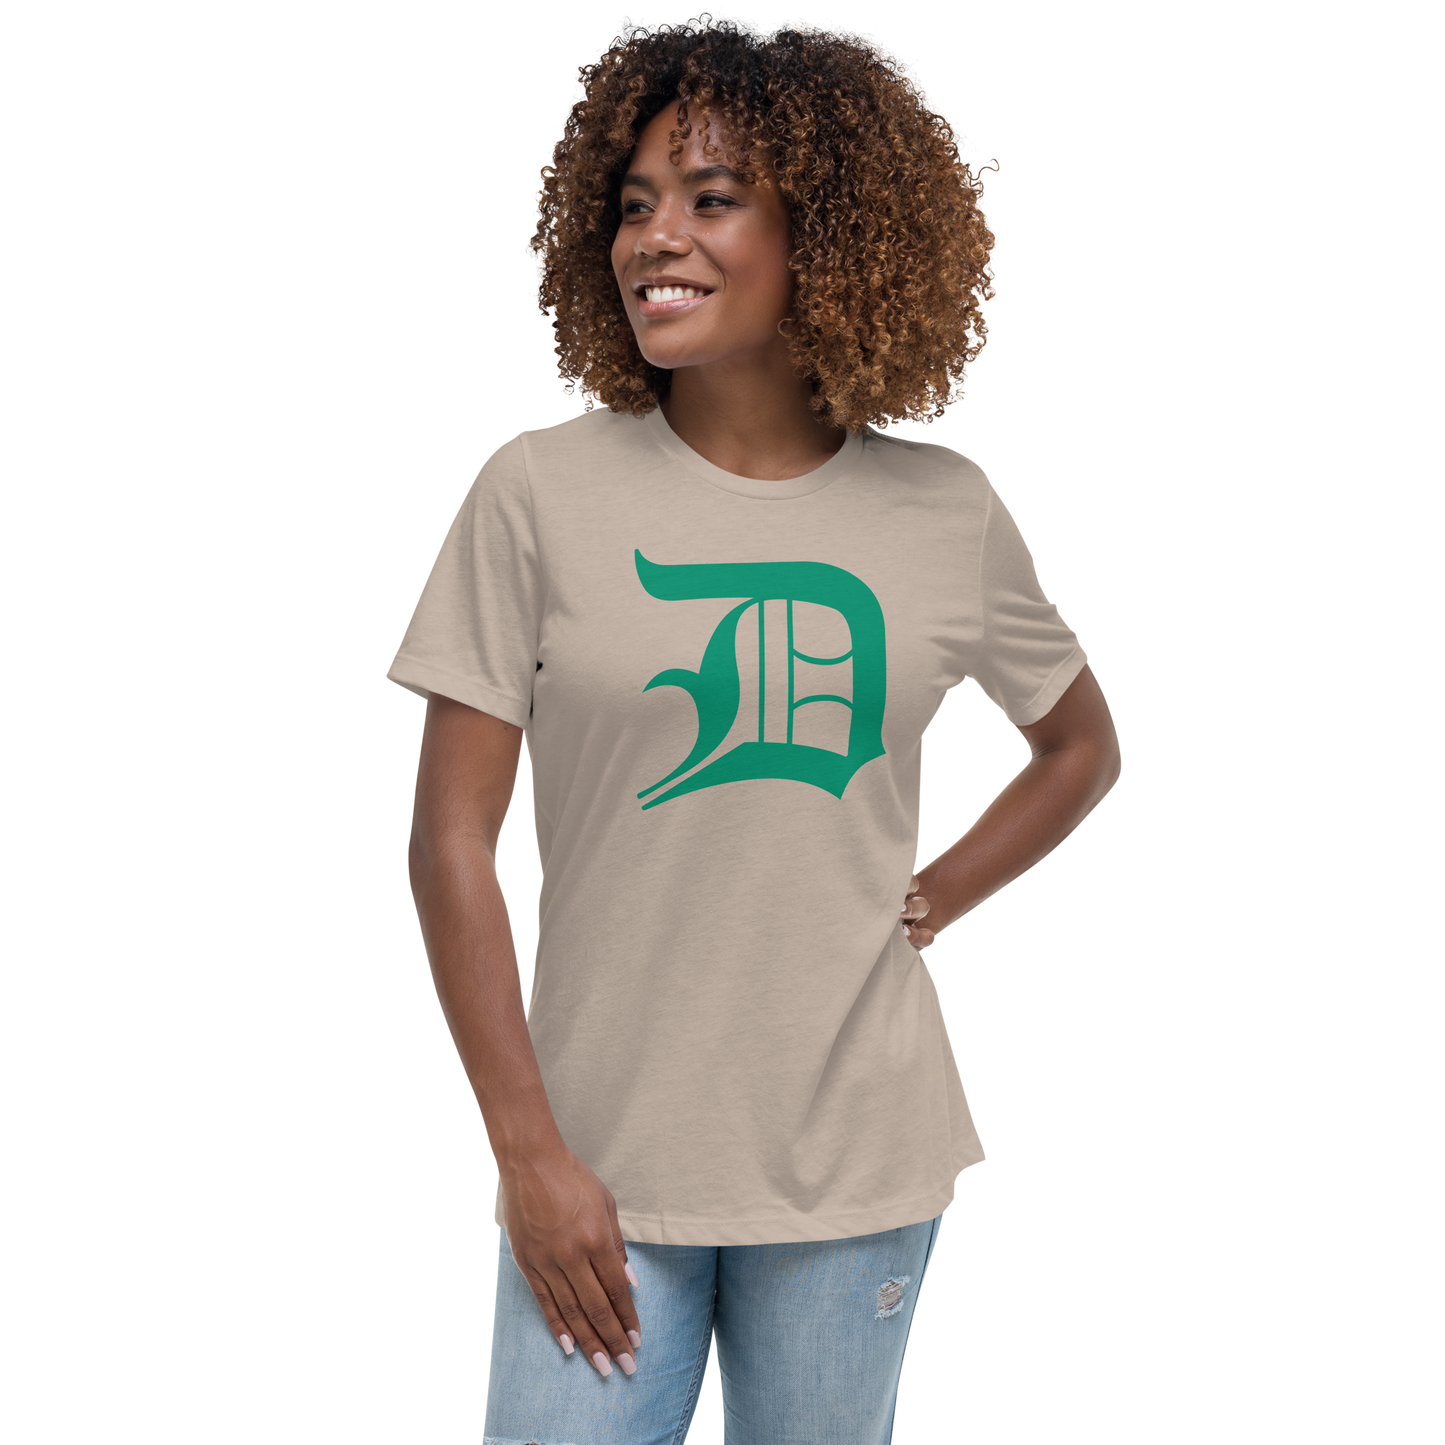 Detroit 'Old English D' T-Shirt (Emerald Green) | Women's Relaxed Fit